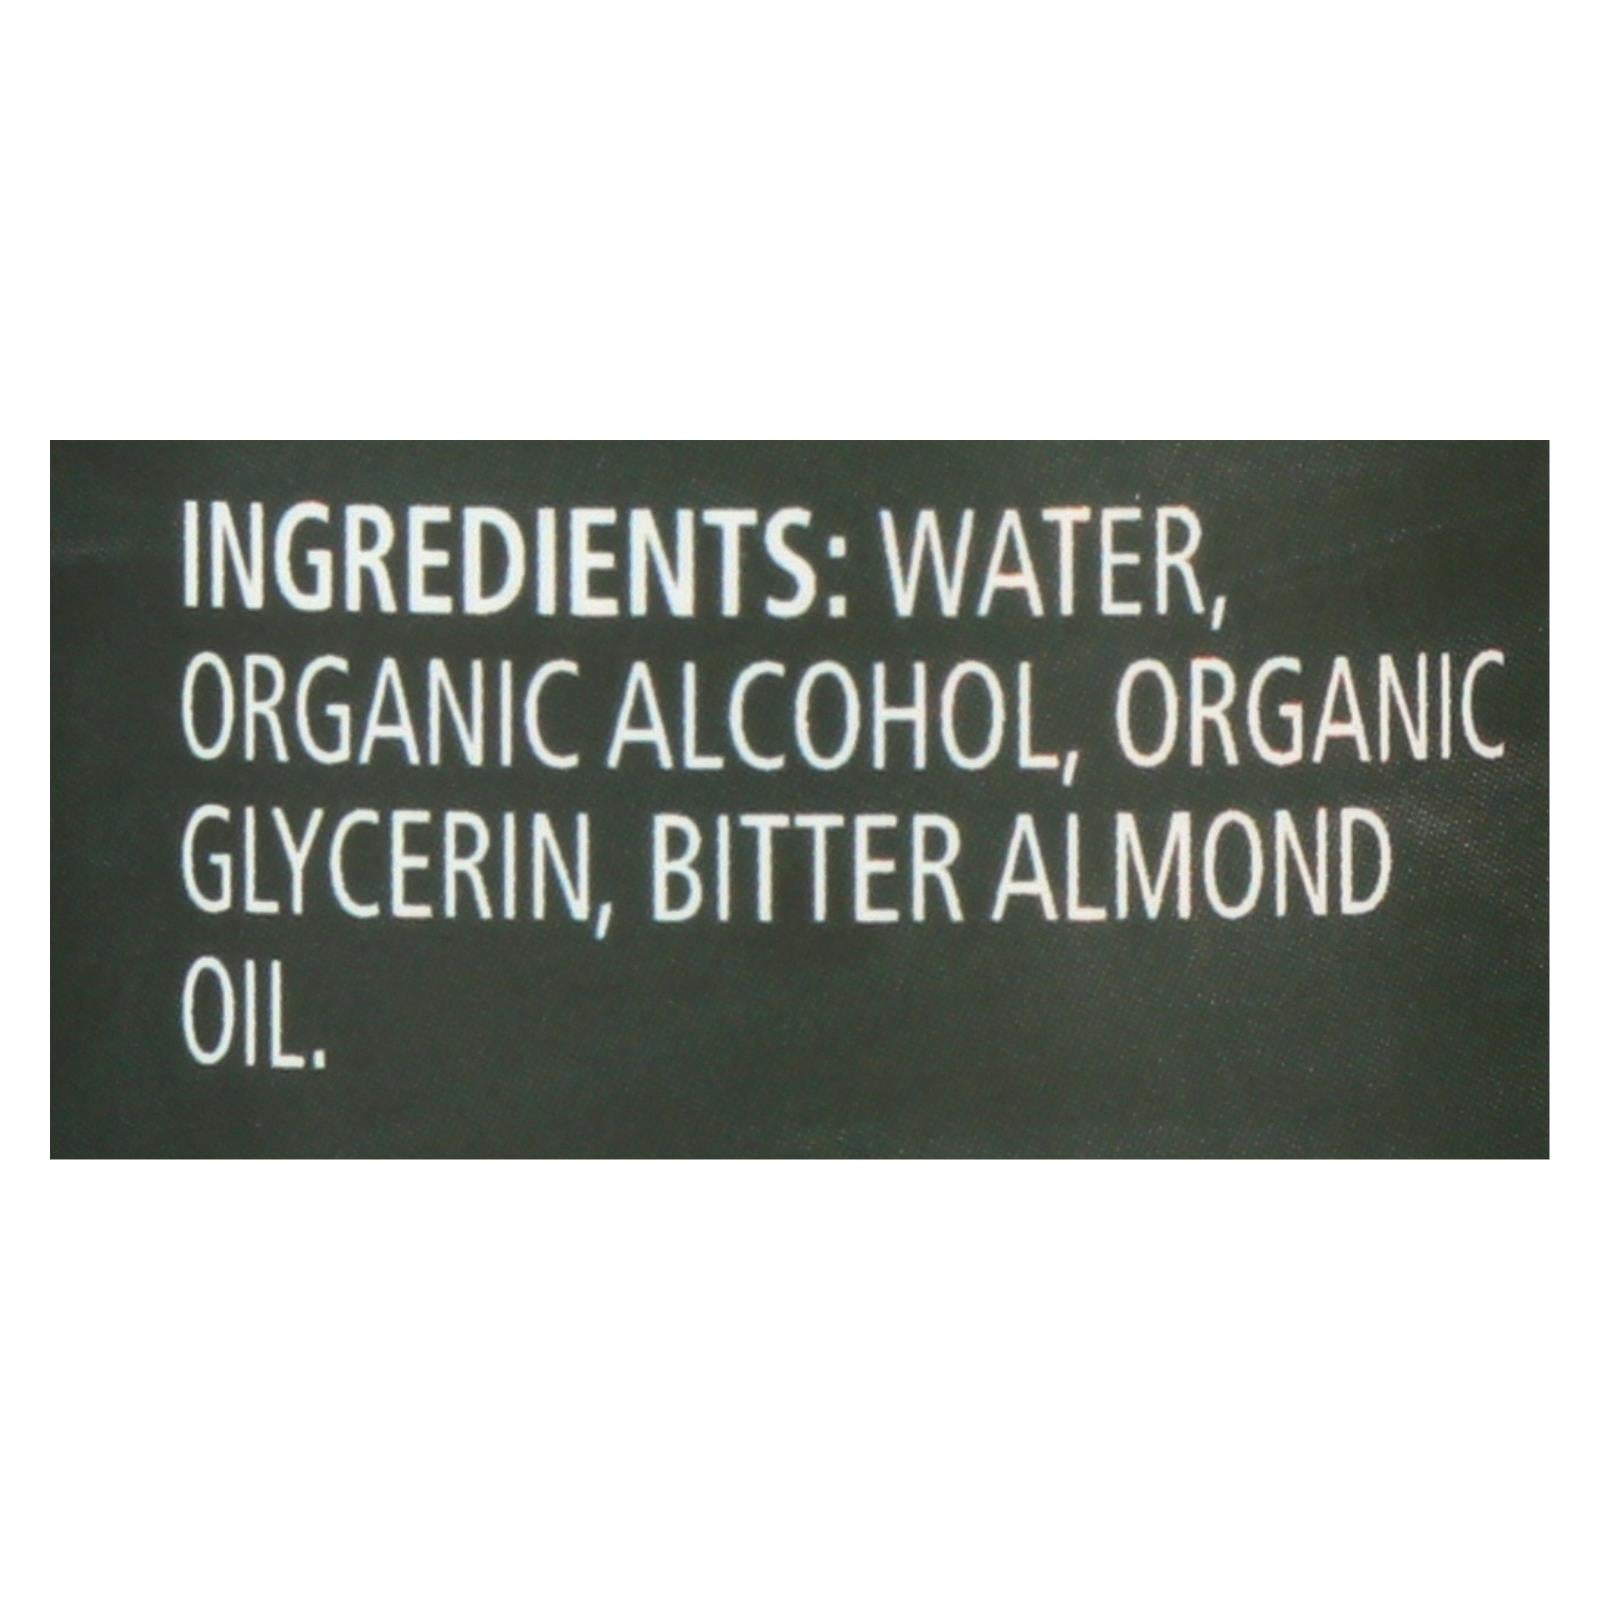 Frontier Herb Almond Extract - Organic - 2 Oz